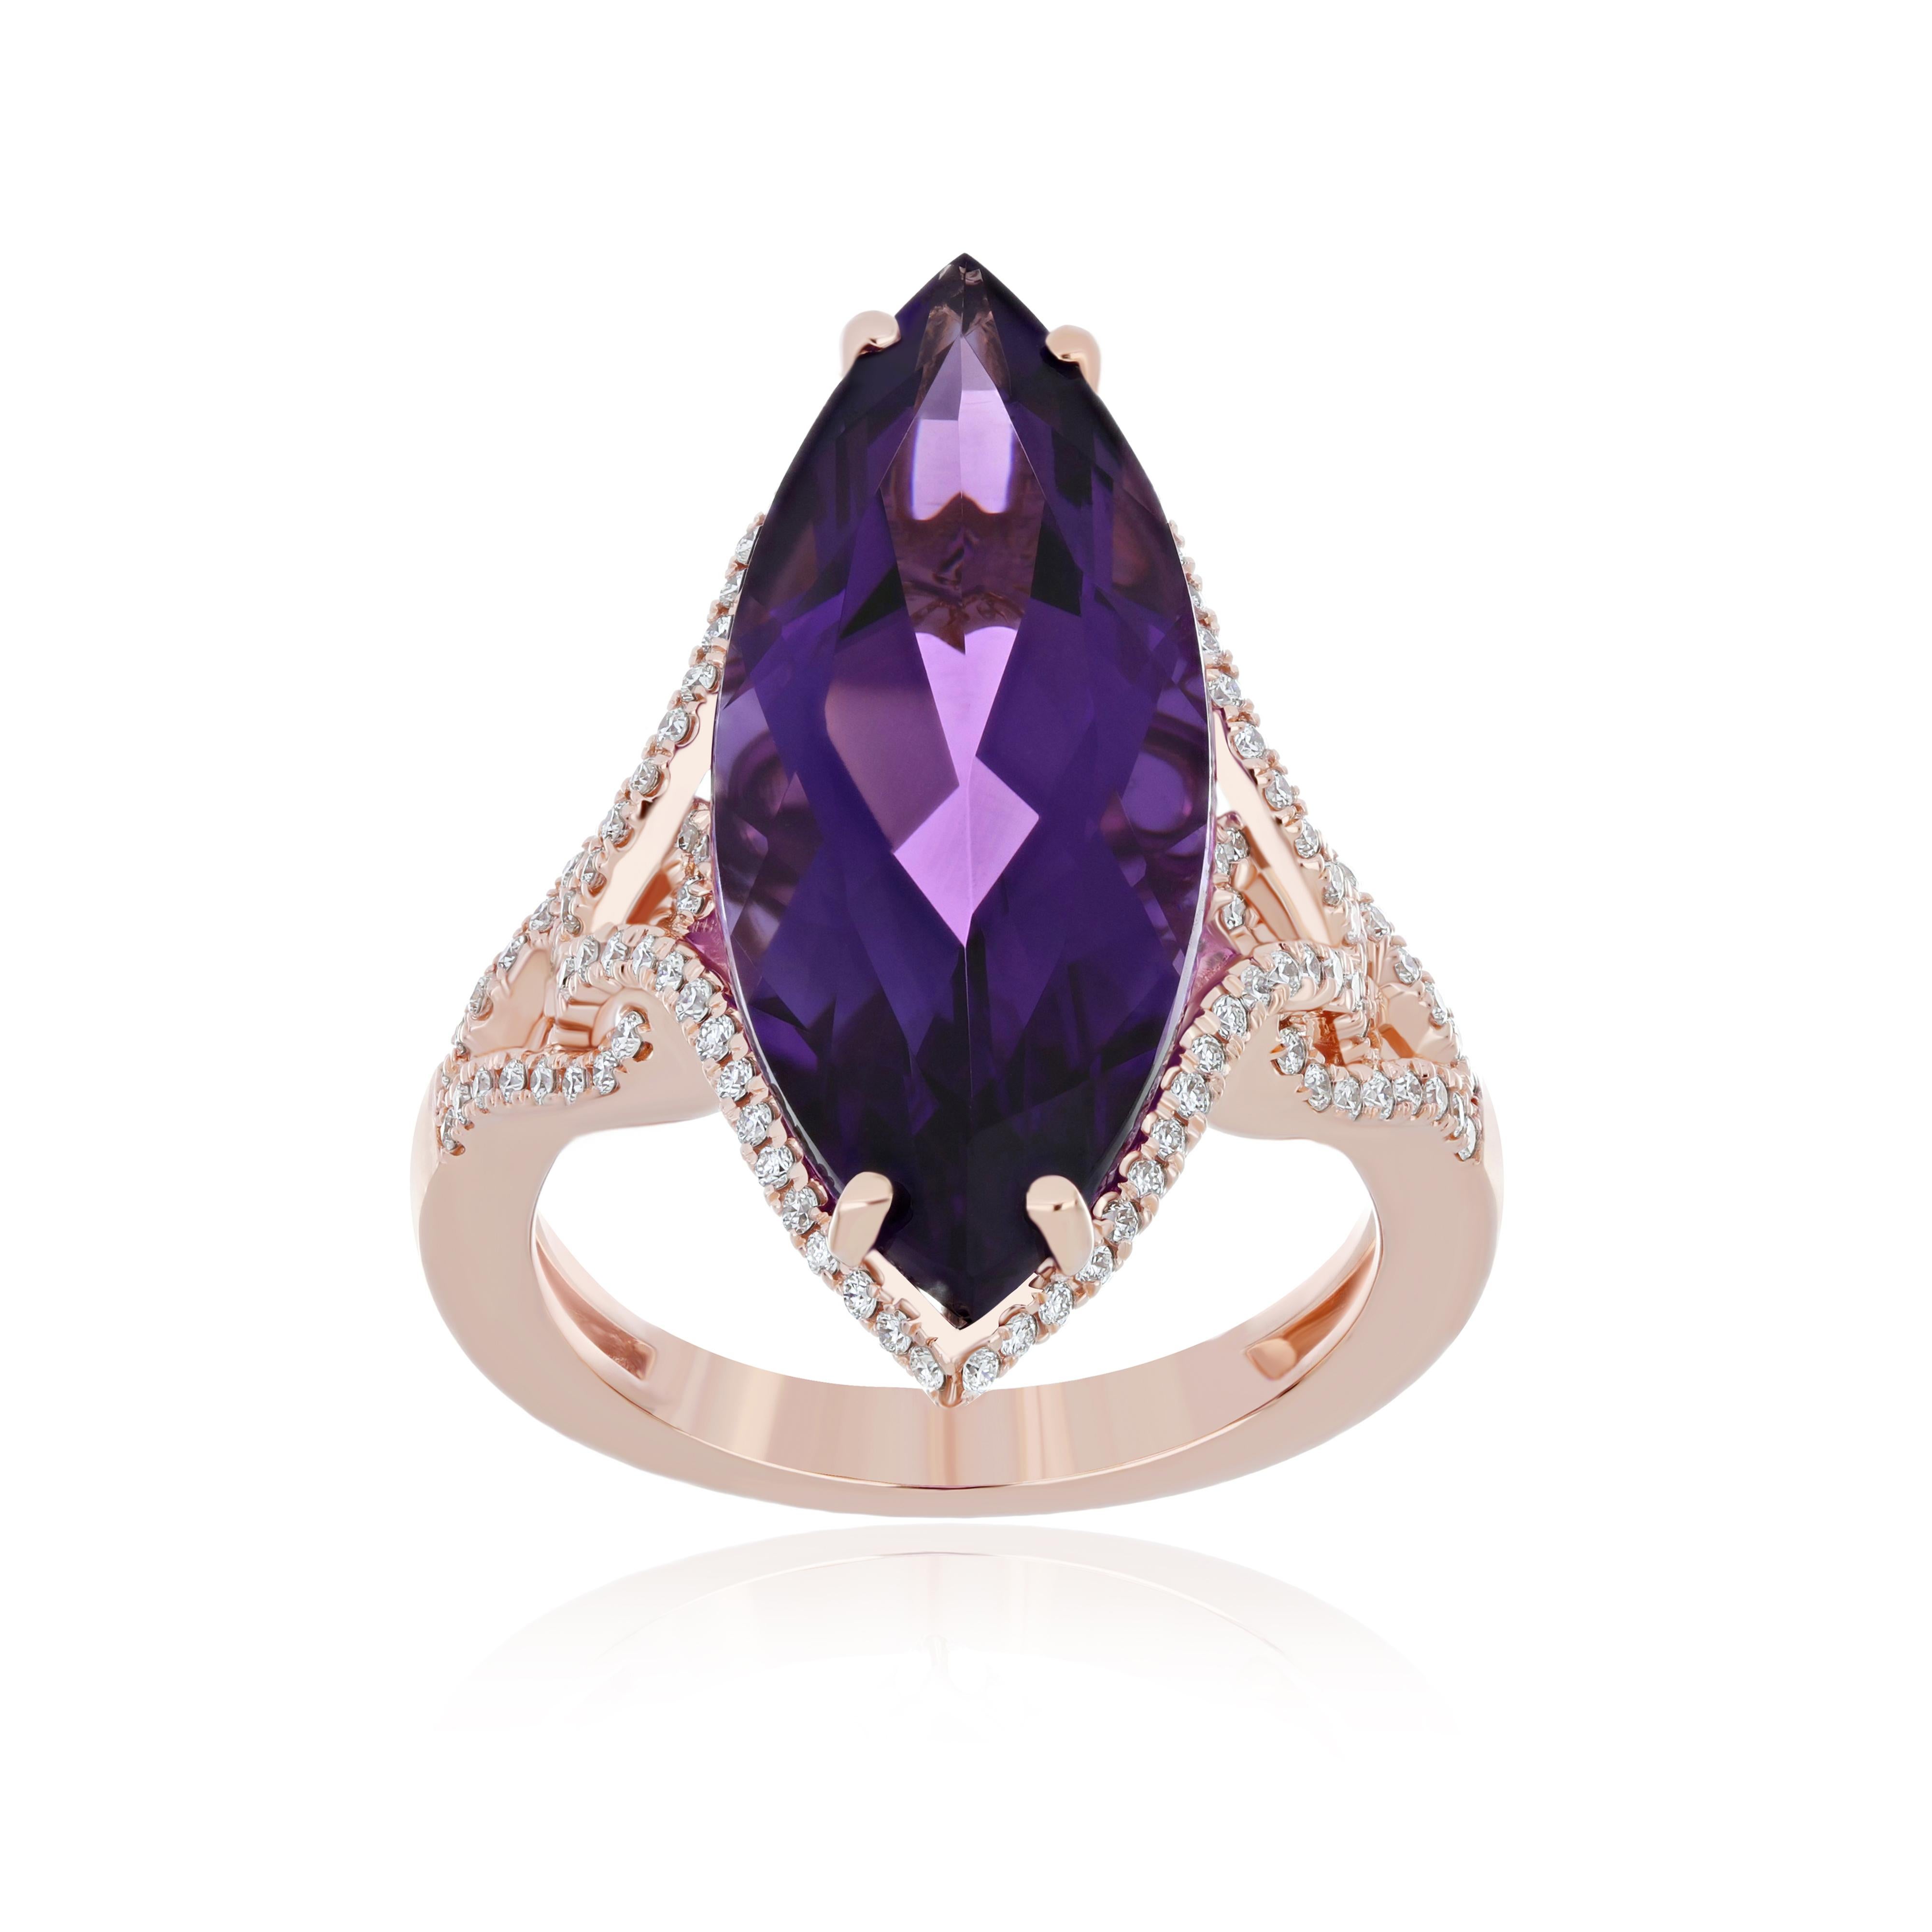 For Sale:  9.85cts Amethyst and Diamond Ring in 14karat Rose Gold Cocktail Ring for Wedding 2